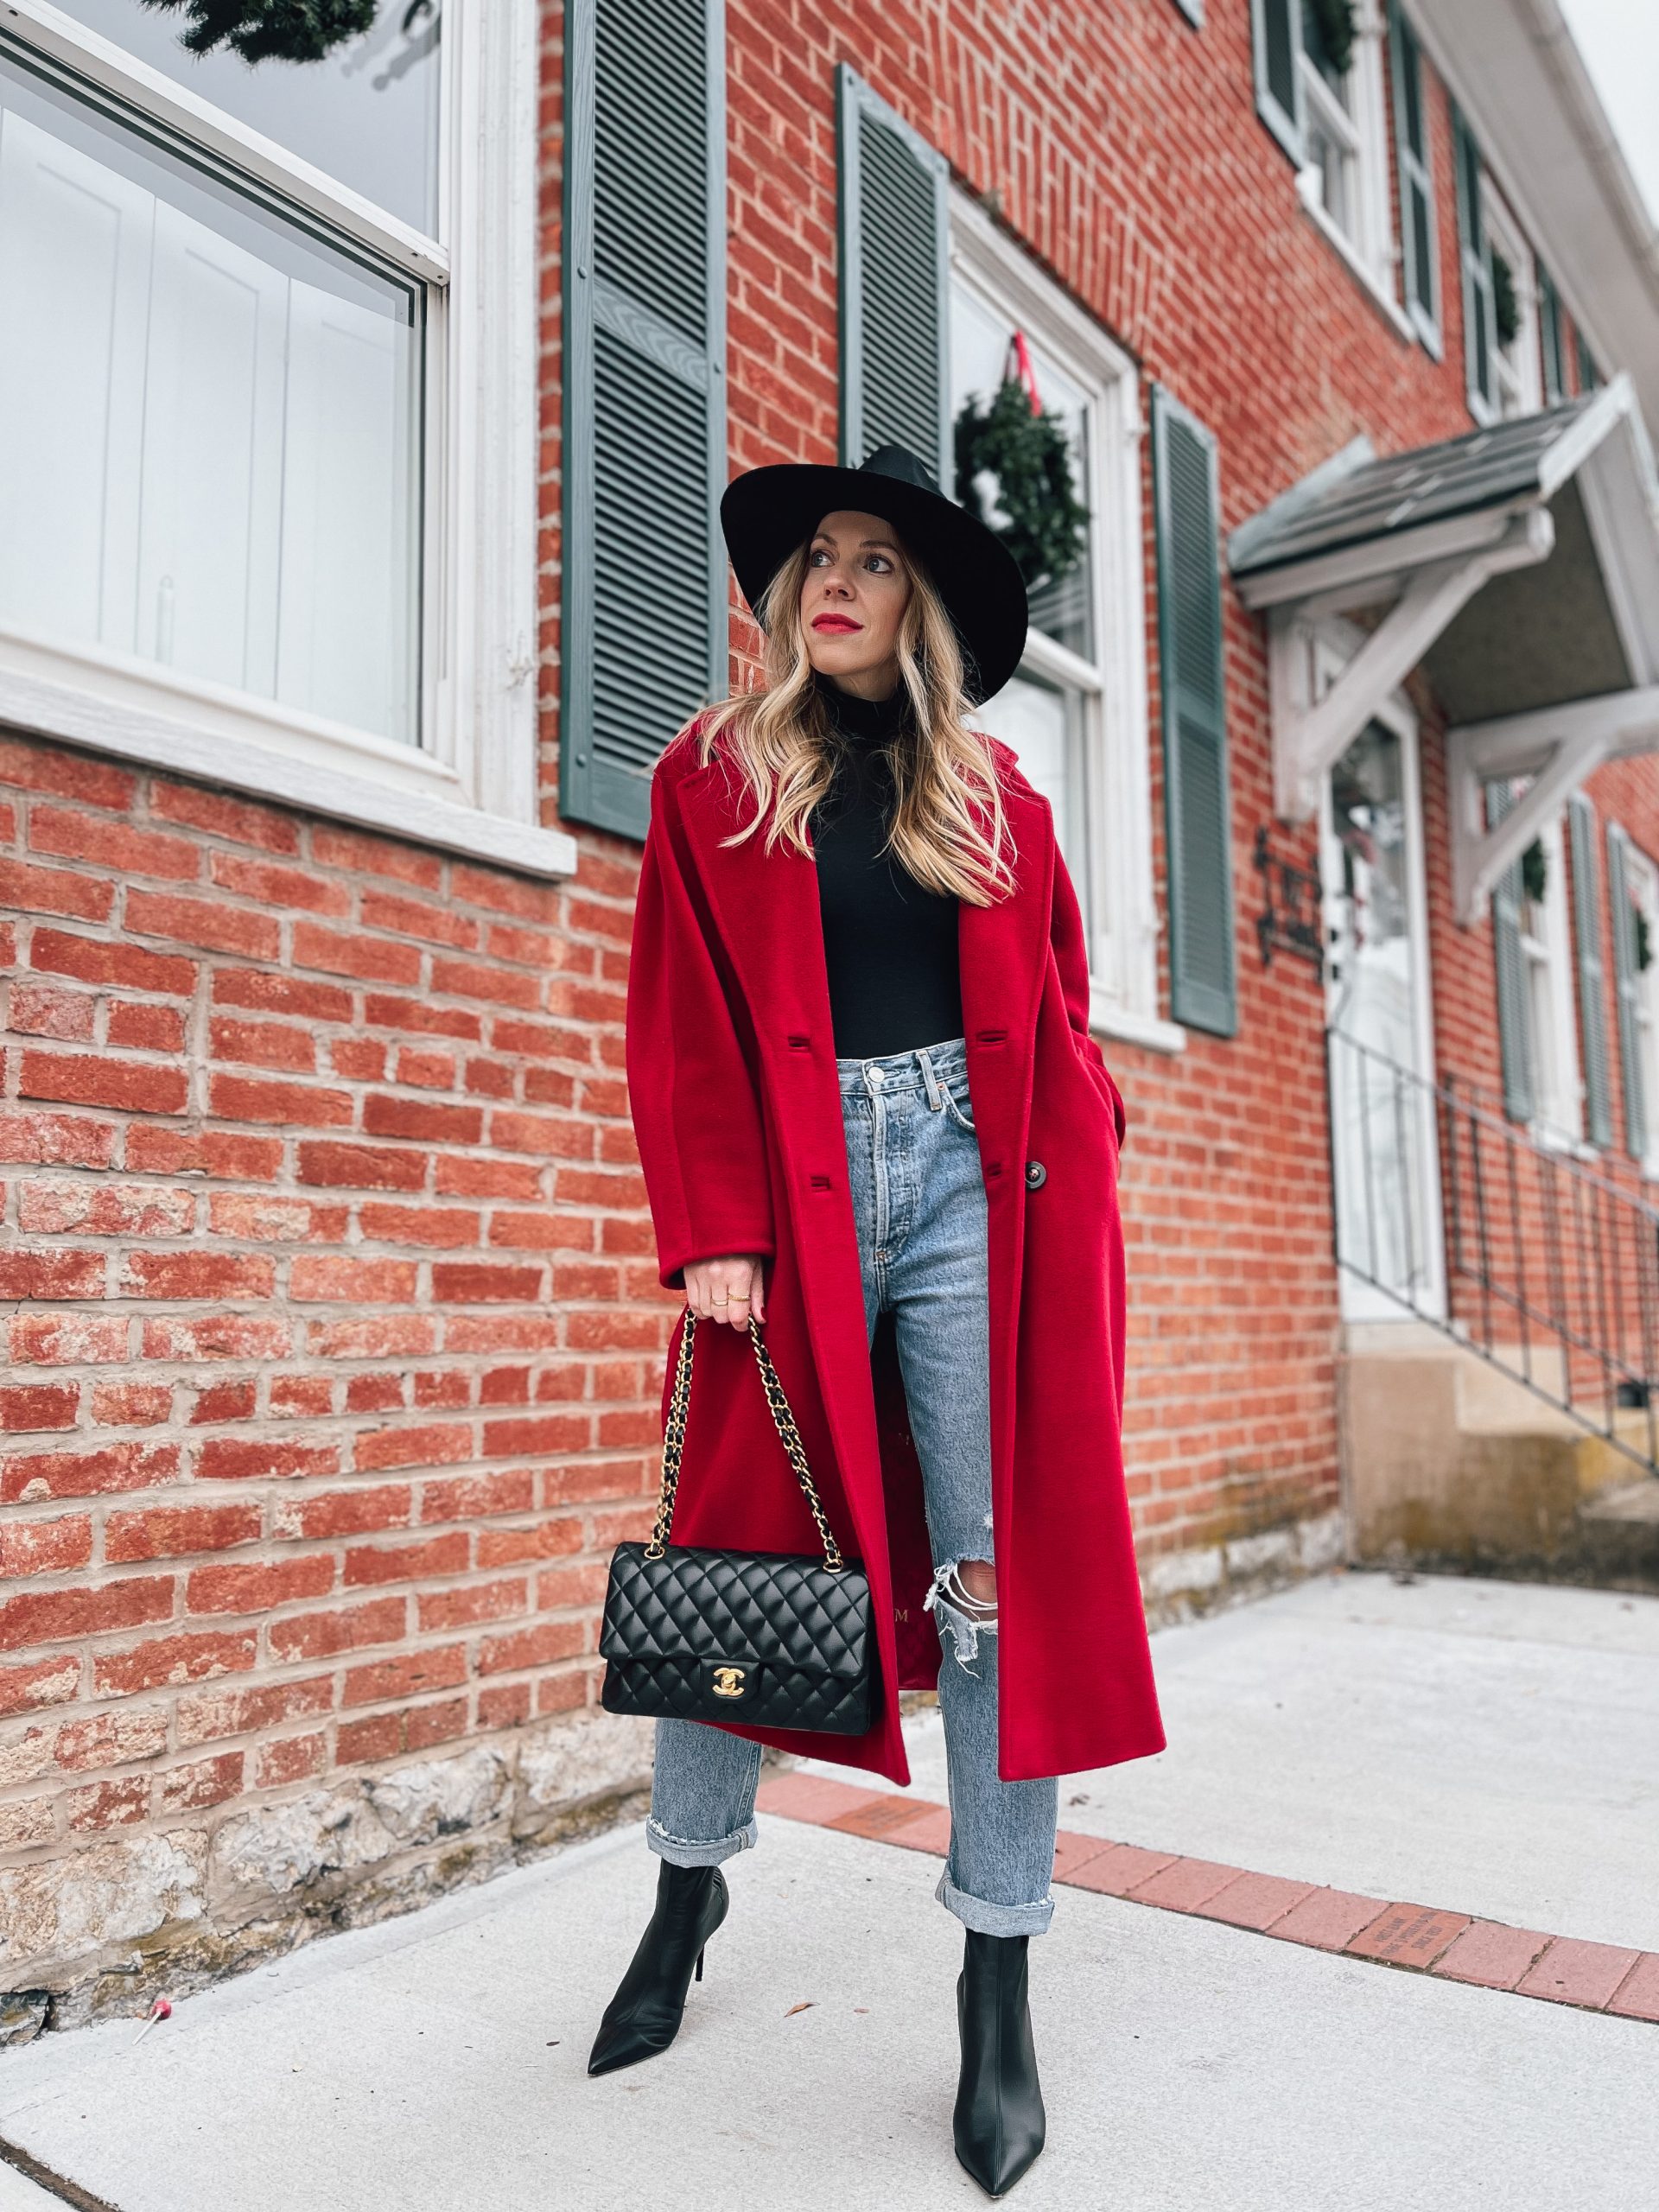 24 Gorgeous Red Coat Outfits To Recreate - Styleoholic